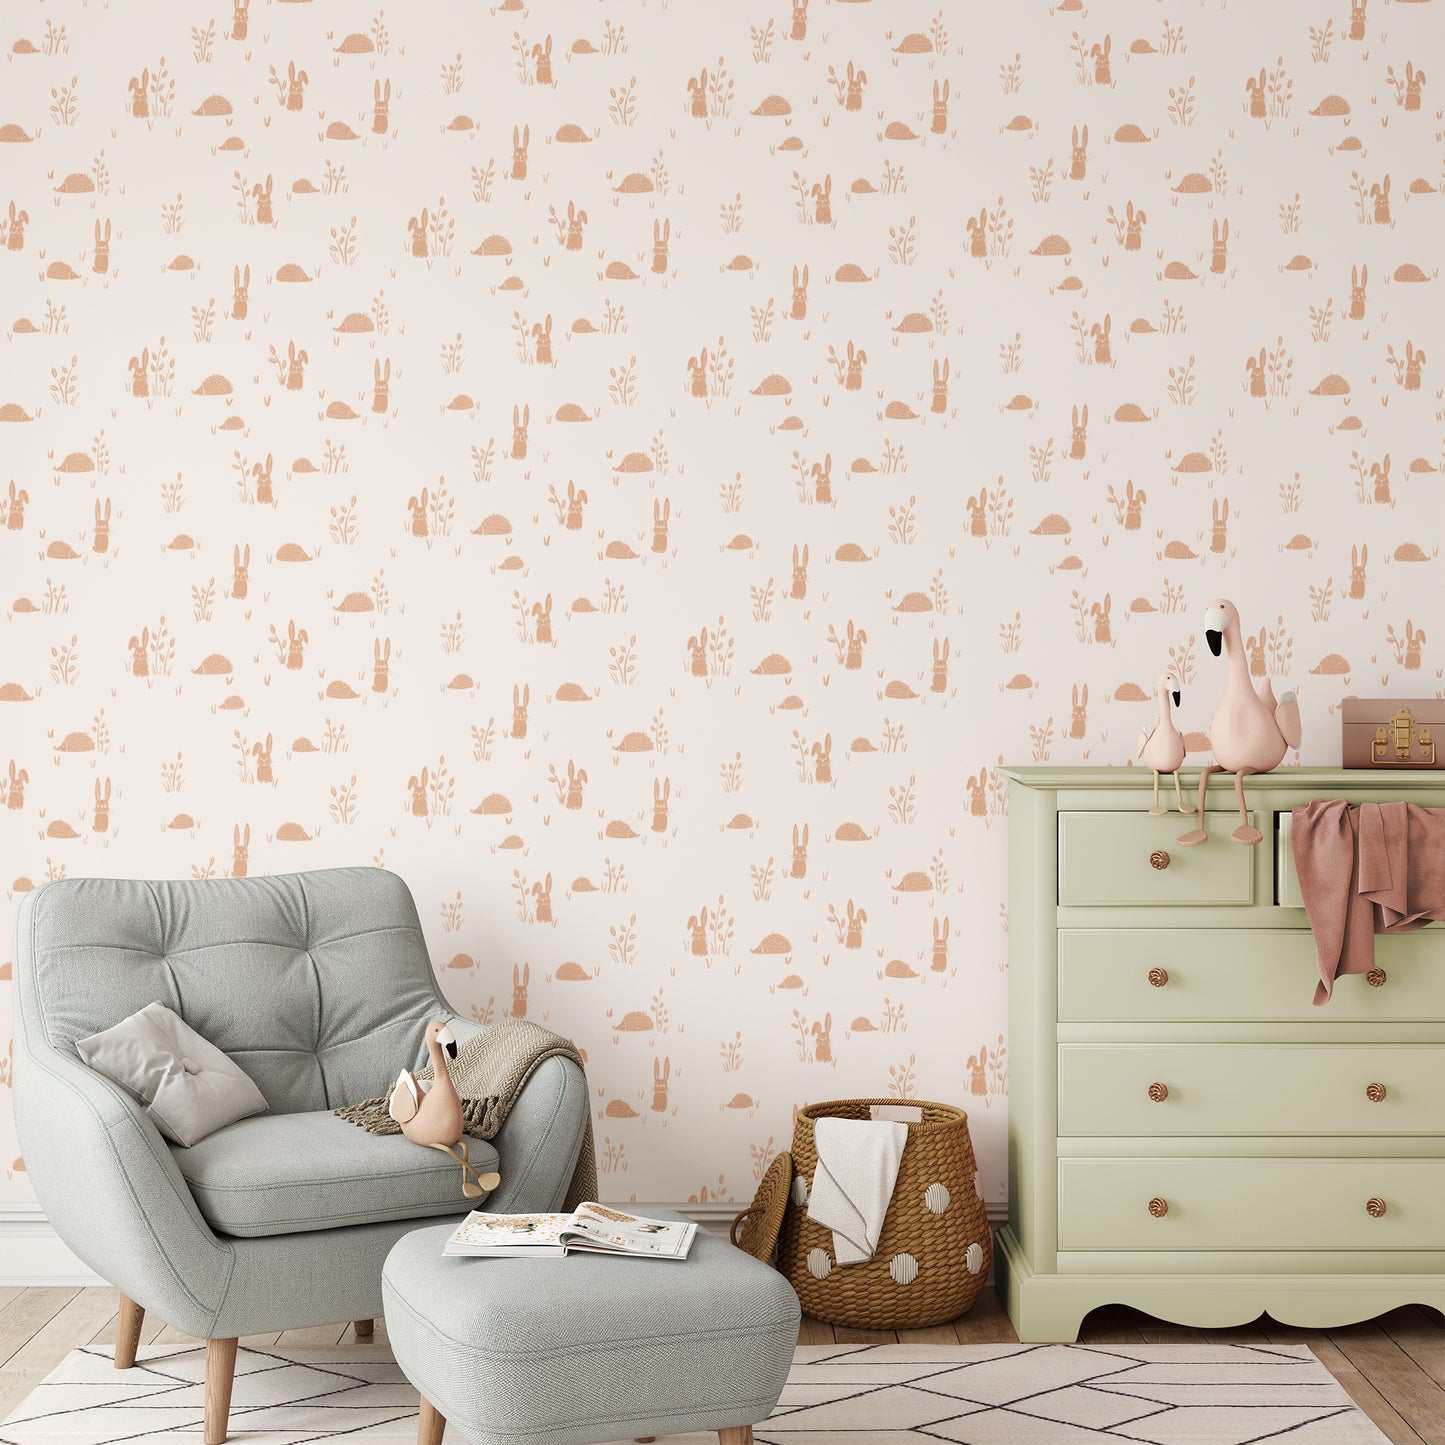 Hedgehogs and Rabbits Wallpaper in Apricot shown in a nursery.